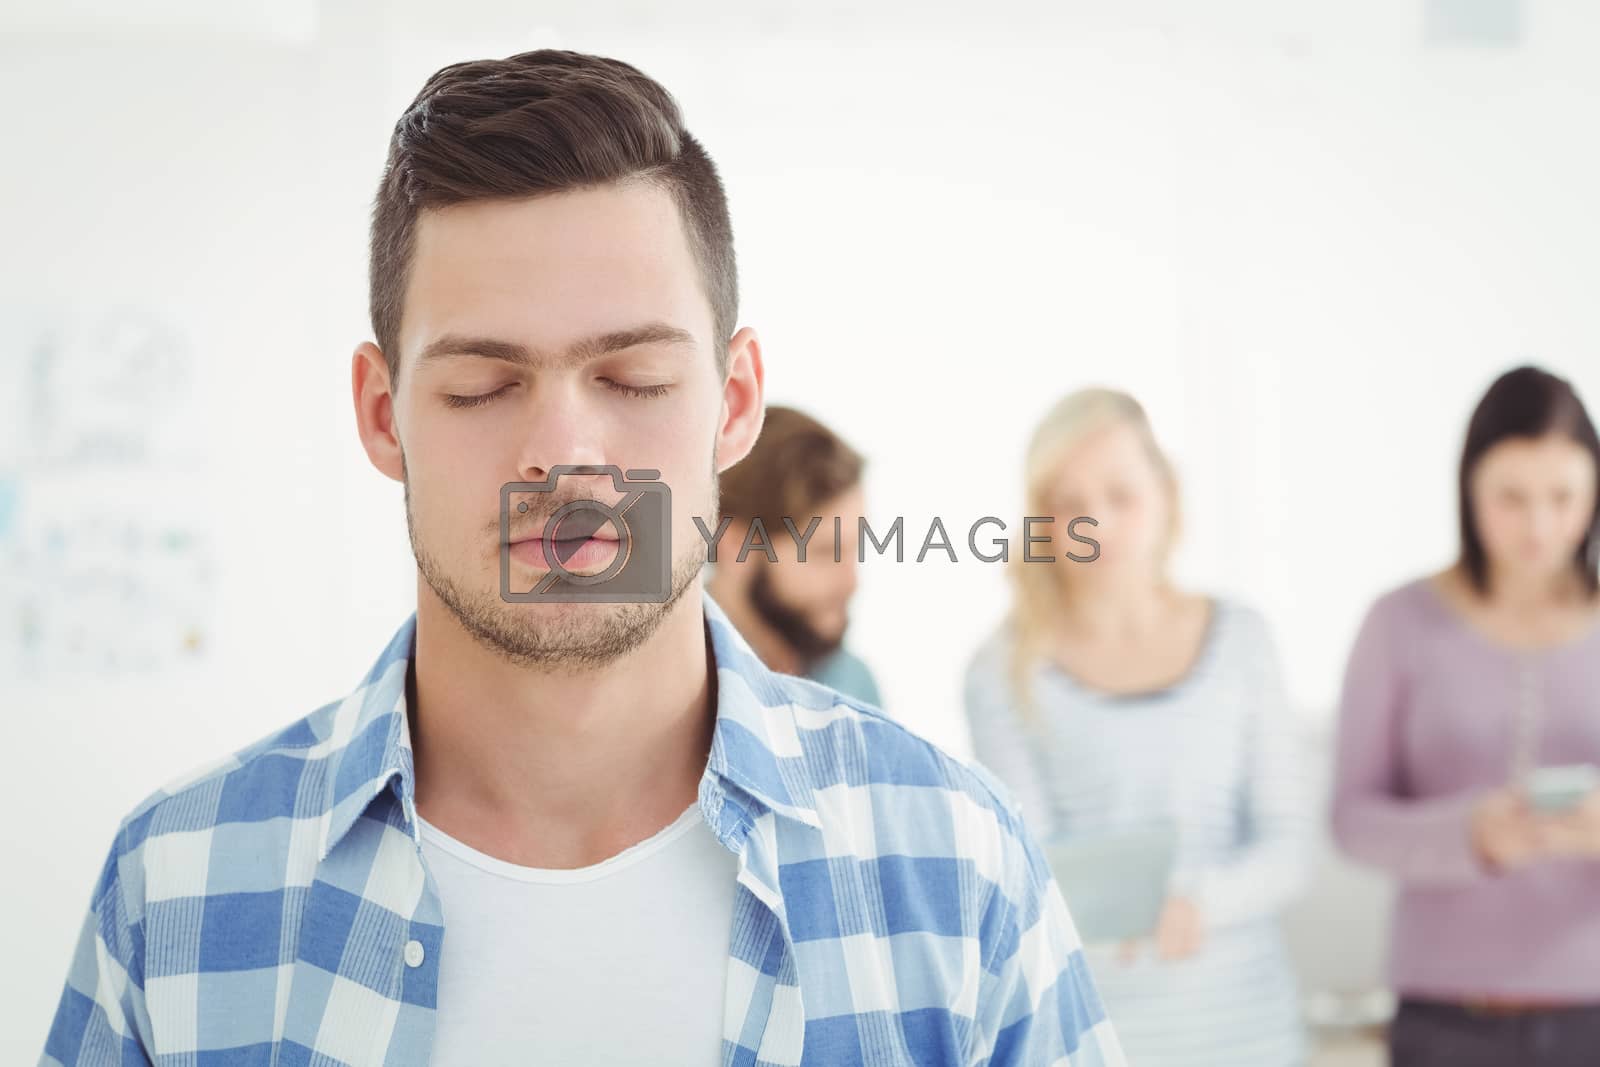 Royalty free image of Man with eyes closed by Wavebreakmedia